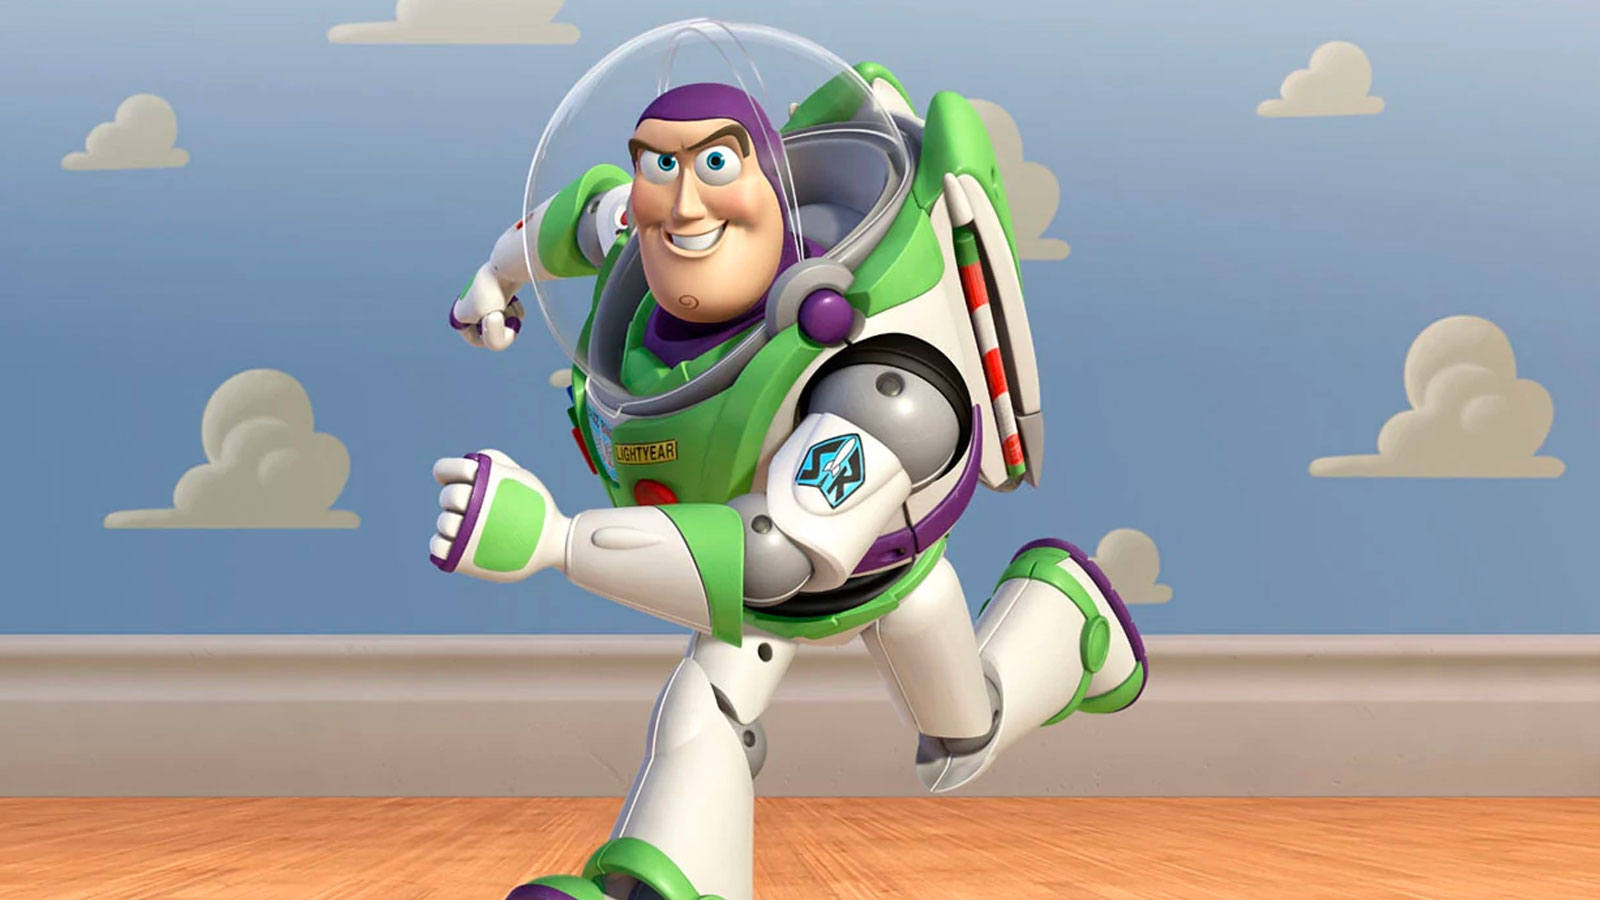 Do You Know the Names of These Toys from “Toy Story”? 210